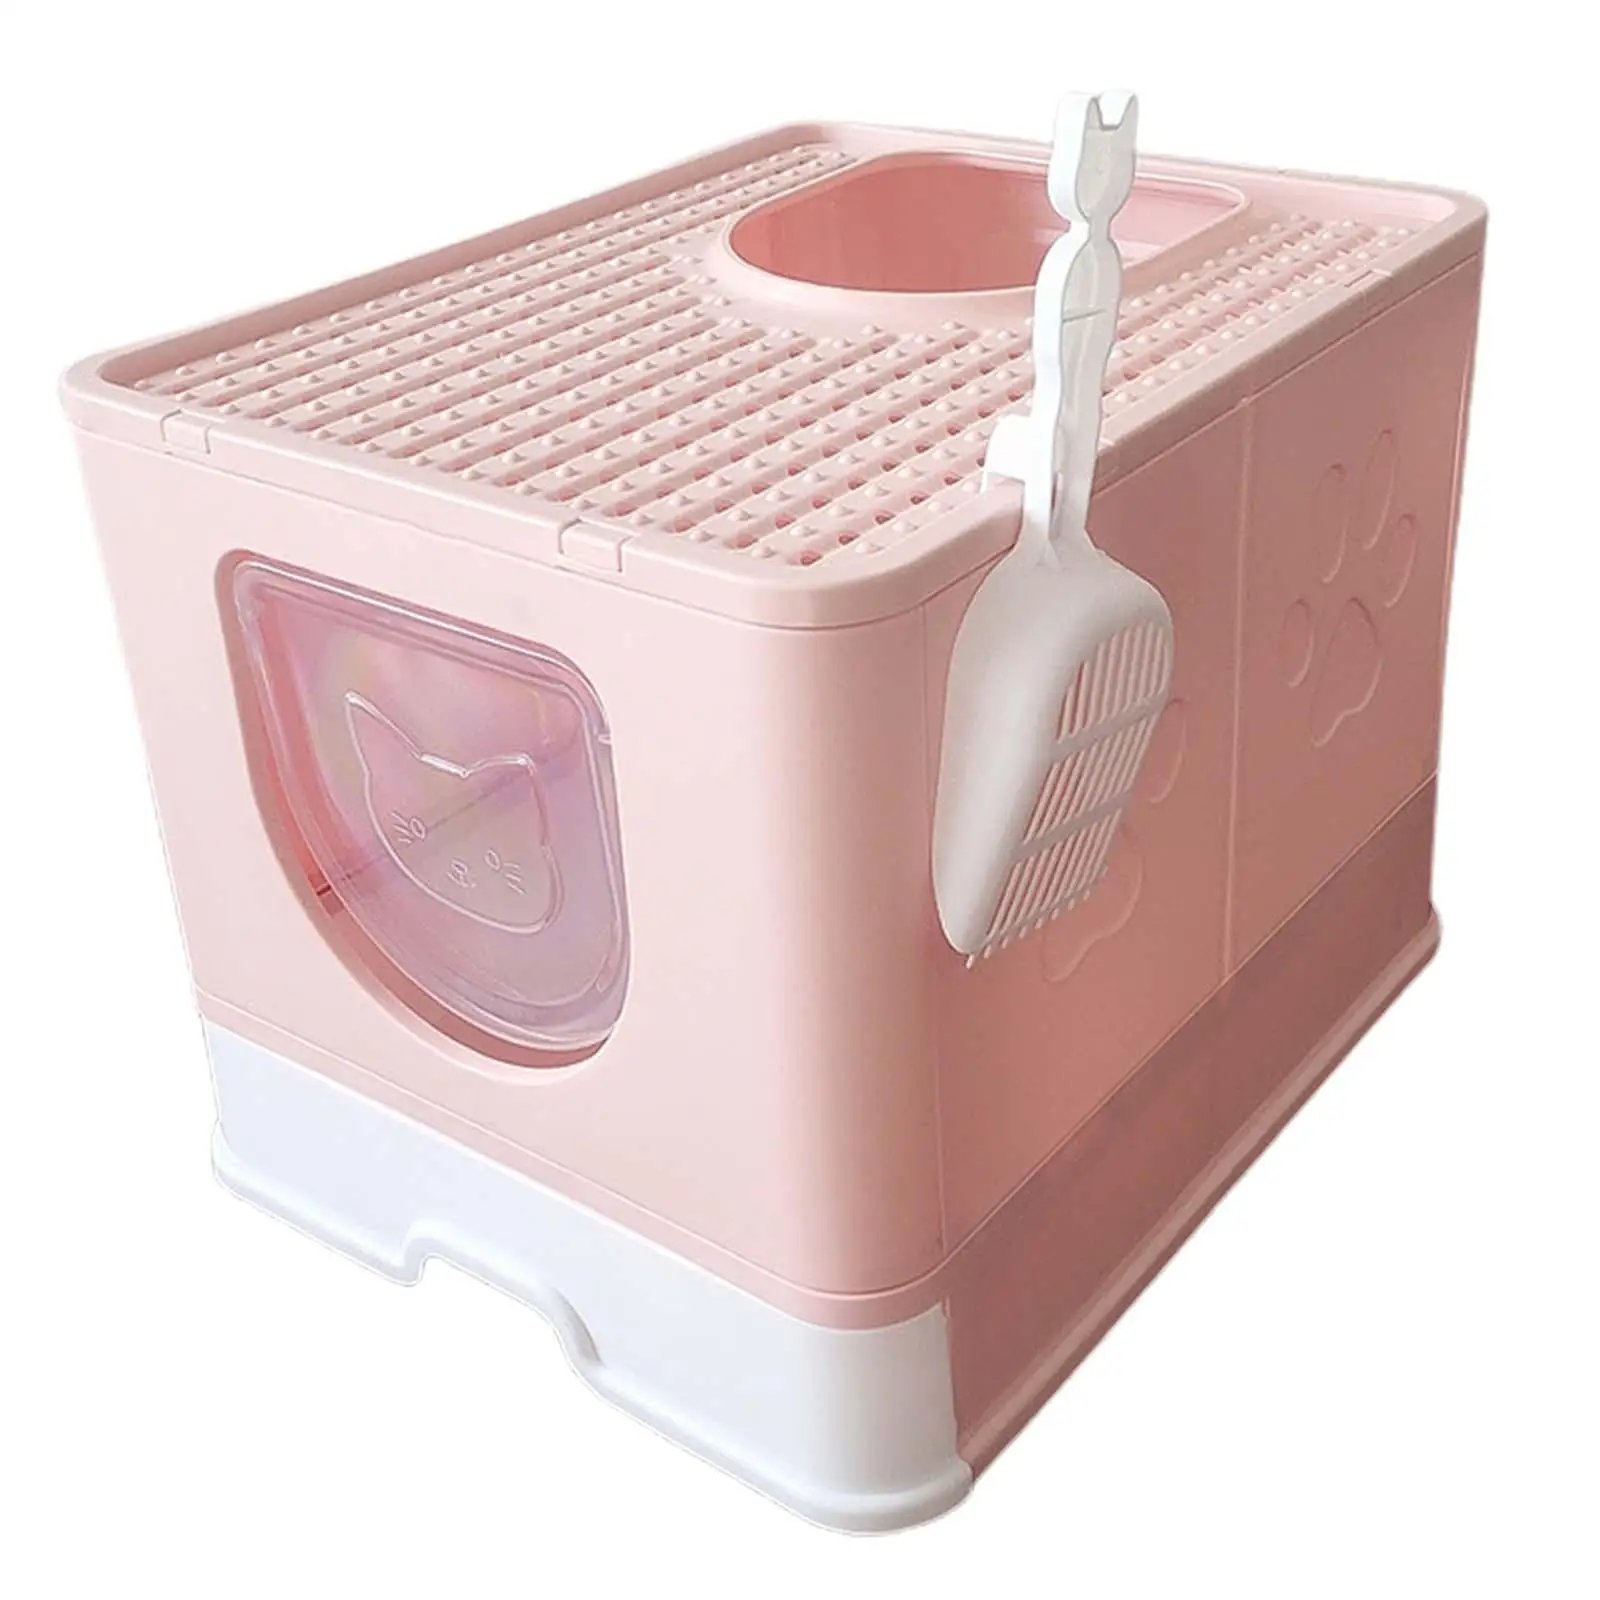 Hooded Cat Litter Box Fully Enclosed Cat Toilet with Door Durable Reusable Easy to Carry and Clean Litter Tray Kitten Potty